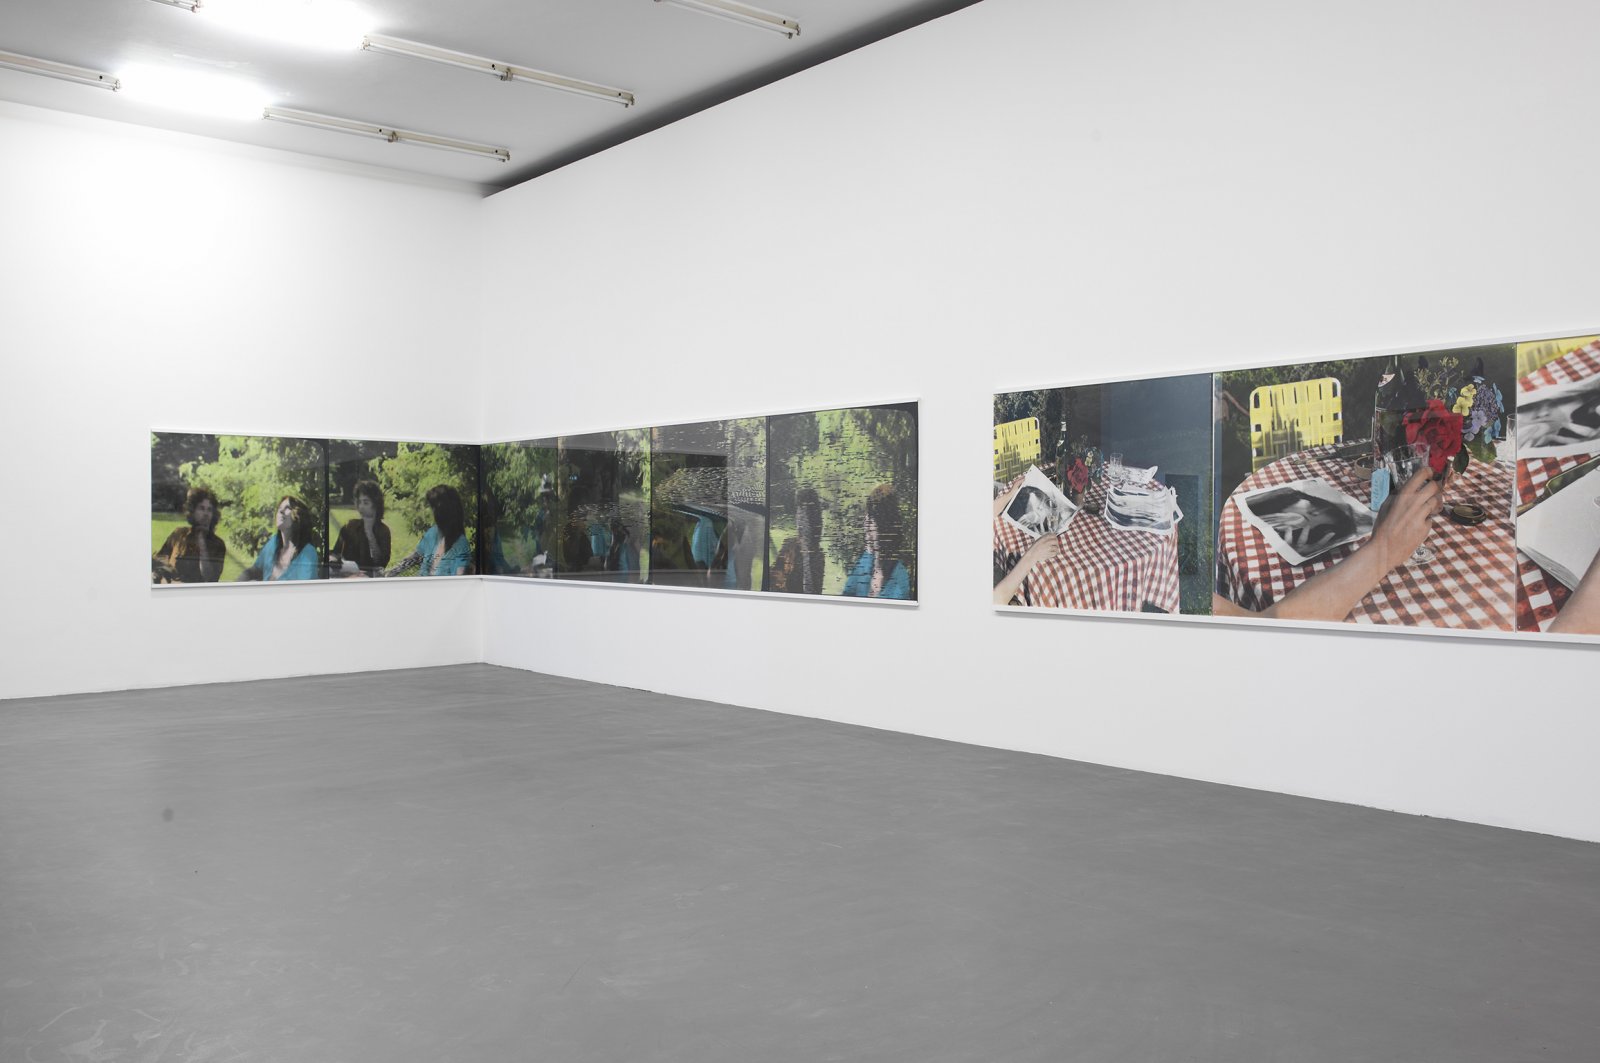 ​​​​​​​Ian Wallace, The Summer Script I & II, 1974, silver prints, oil, plexiglas on paper, 12 panels, each 47 x 69 in. (119 x 176 cm). Installation view, ​A Literature of Images​, Witte de With, Rotterdam, 2008​​​​​​​​​​​​ by Ian Wallace